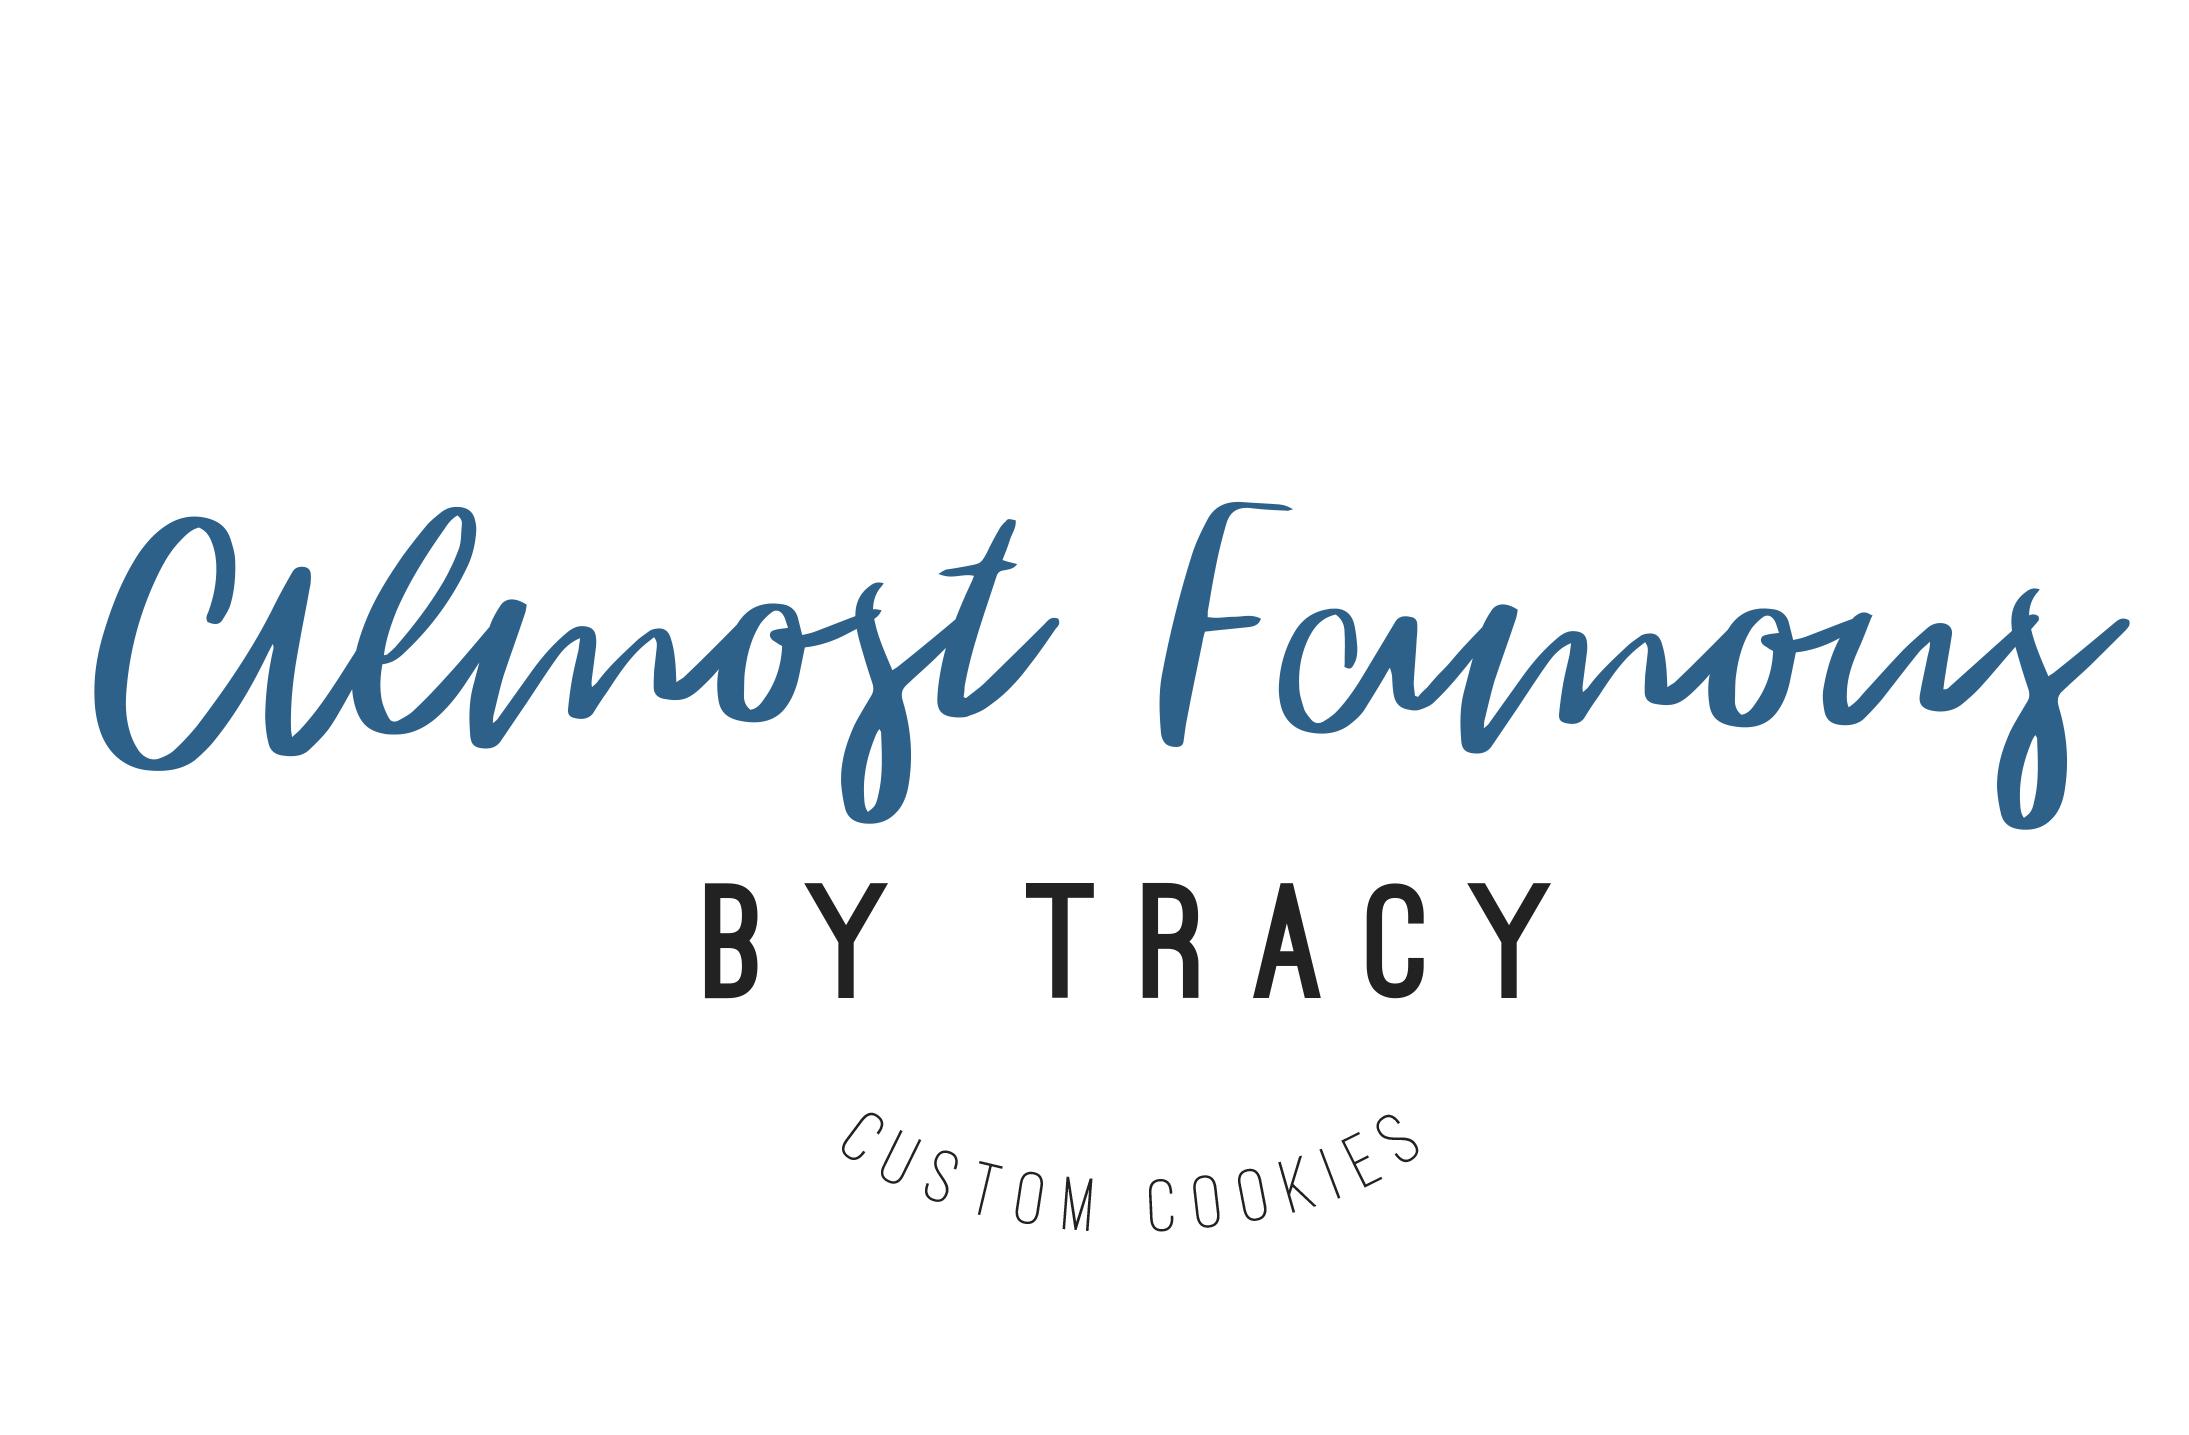 Almost Famous by Tracy 